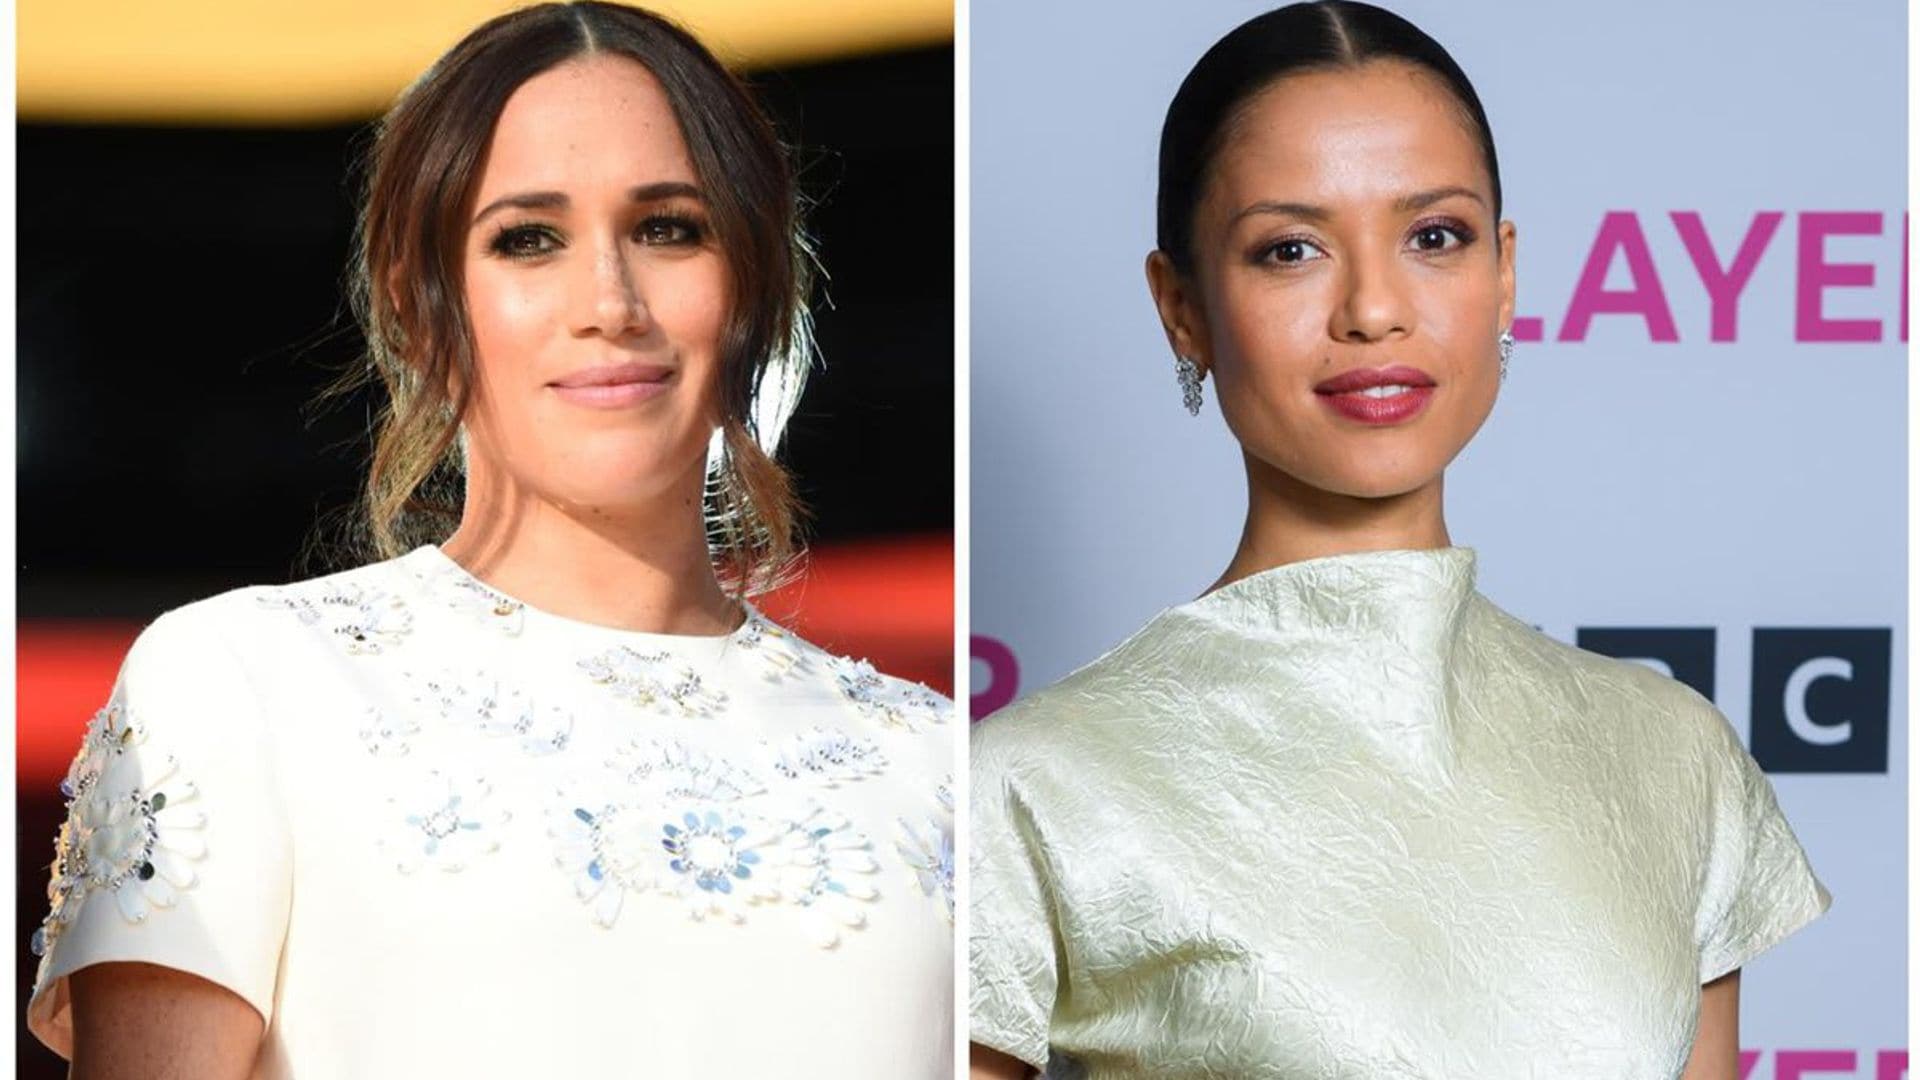 The Crown: Is Gugu Mbatha-Raw playing Meghan Markle in the Netflix series?